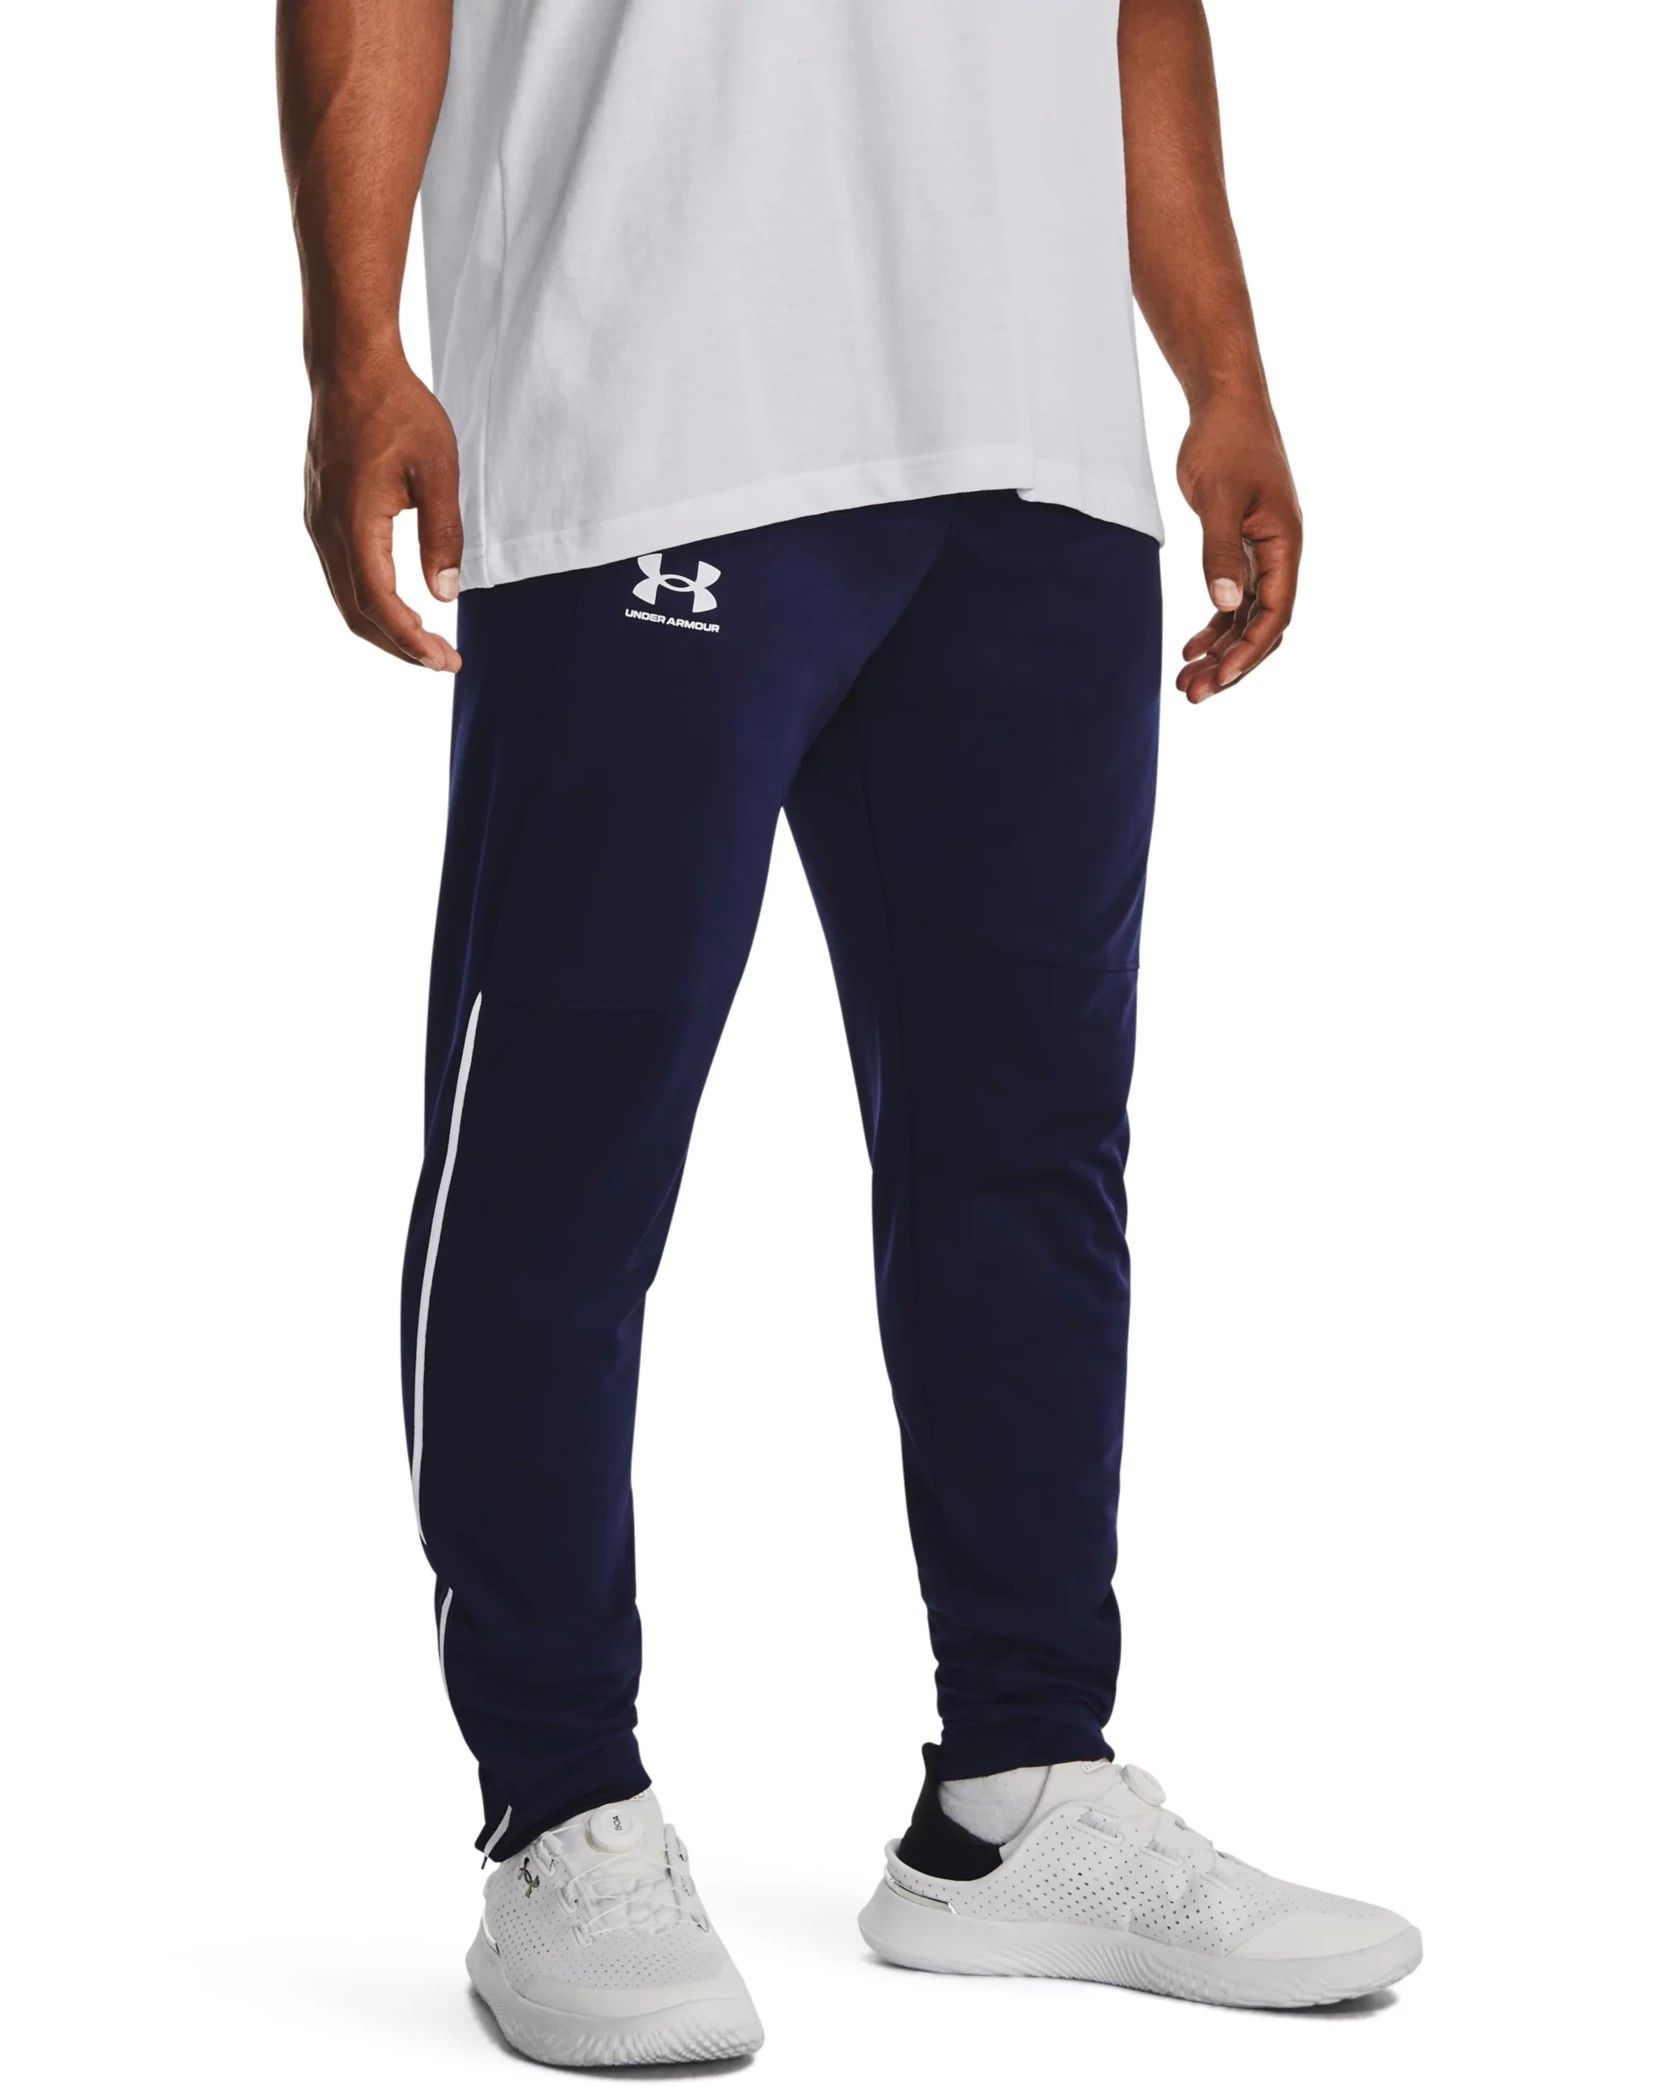 Buy Premium Adidas x KORN Track Pants Online – Extra Butter India